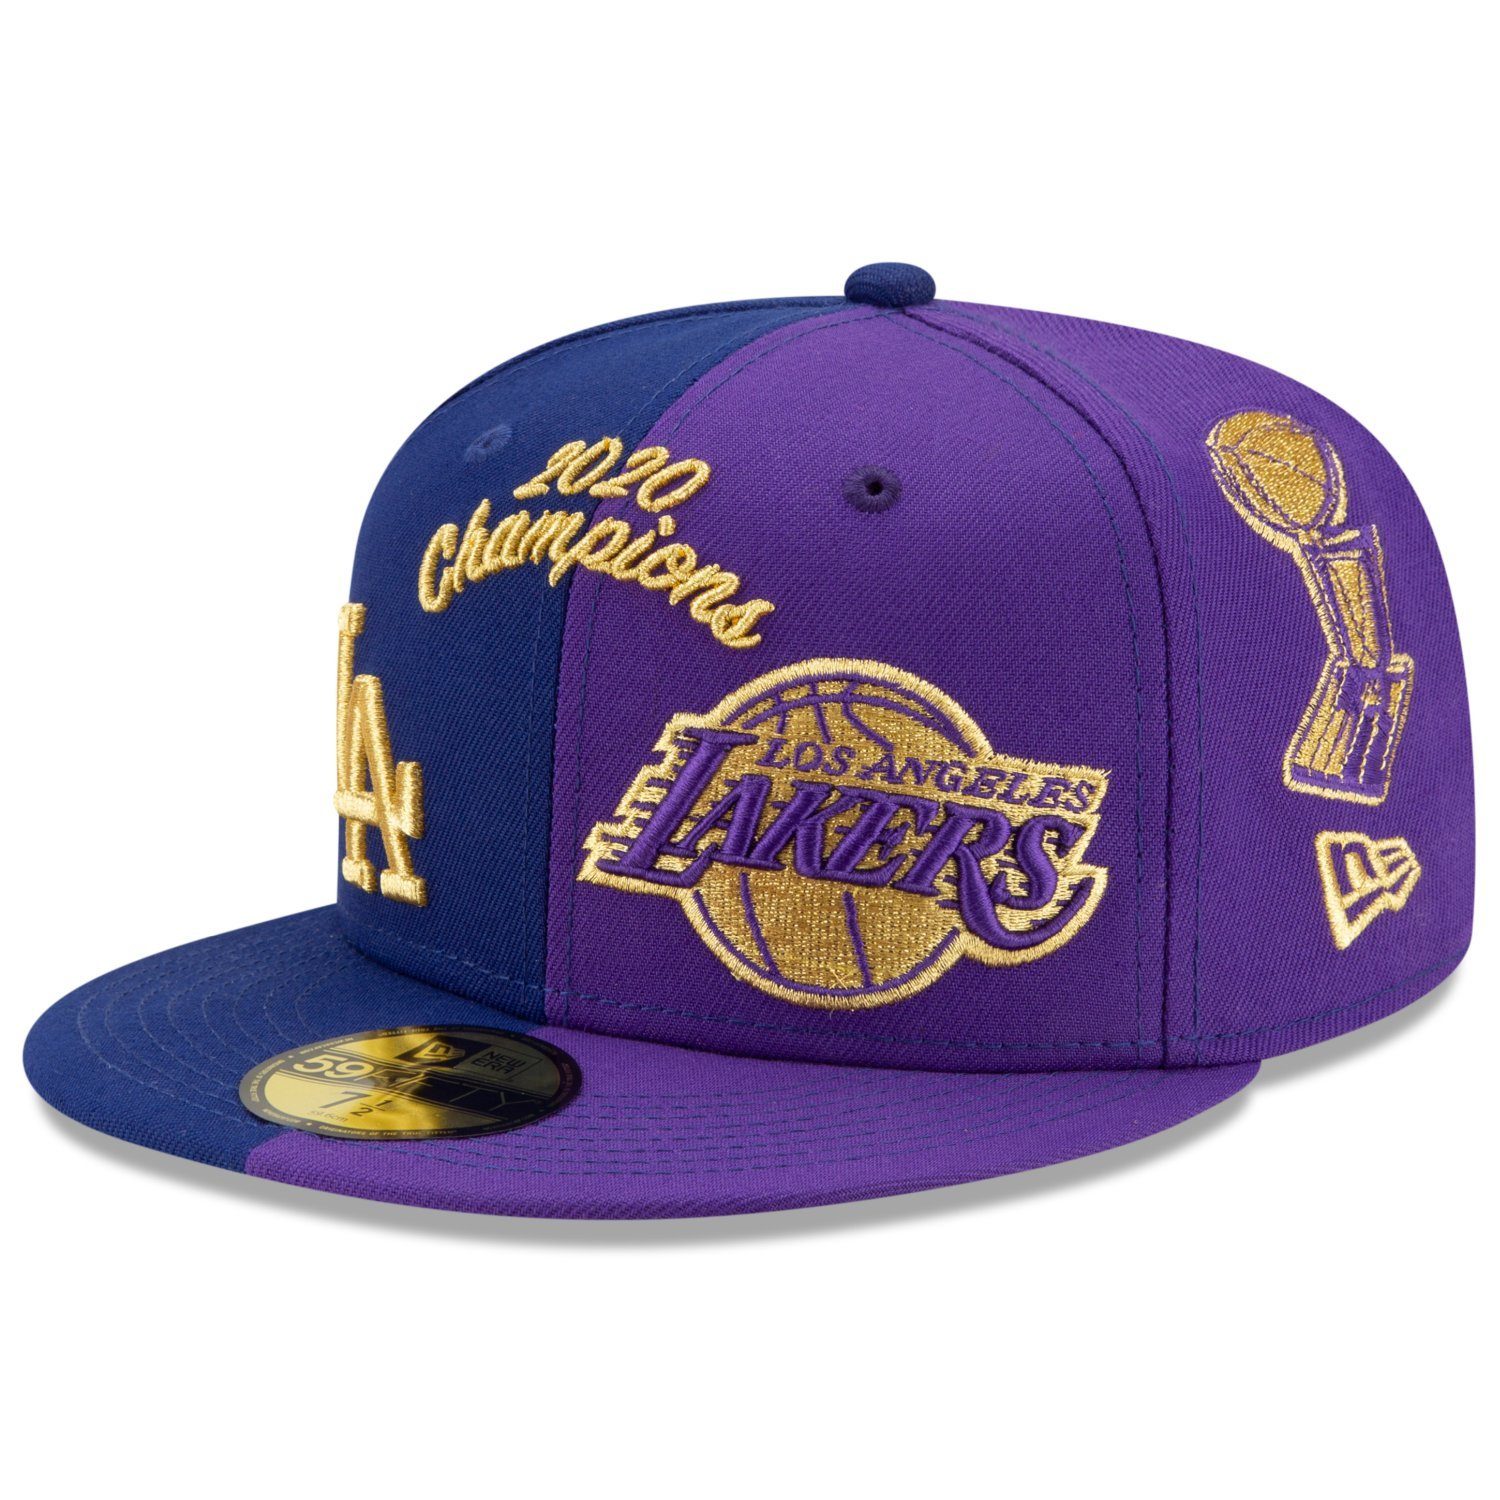 New Era Fitted Cap 59Fifty CHAMPS 2020 LA Lakers & Dodgers